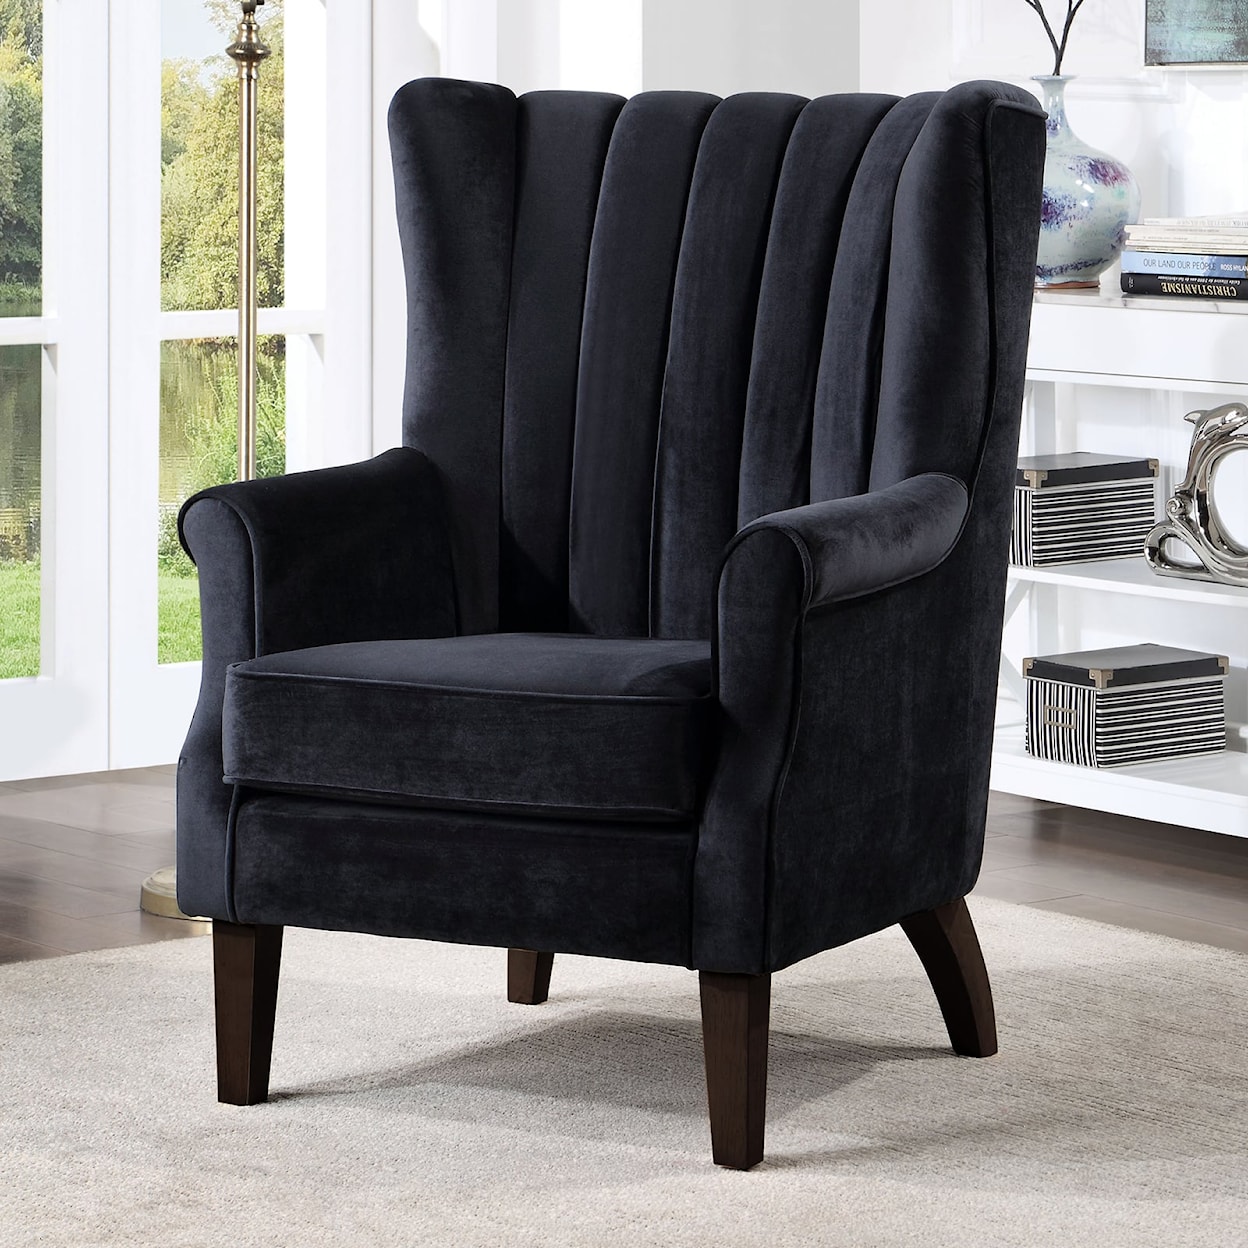 Furniture of America REYNOSA Accent Chair